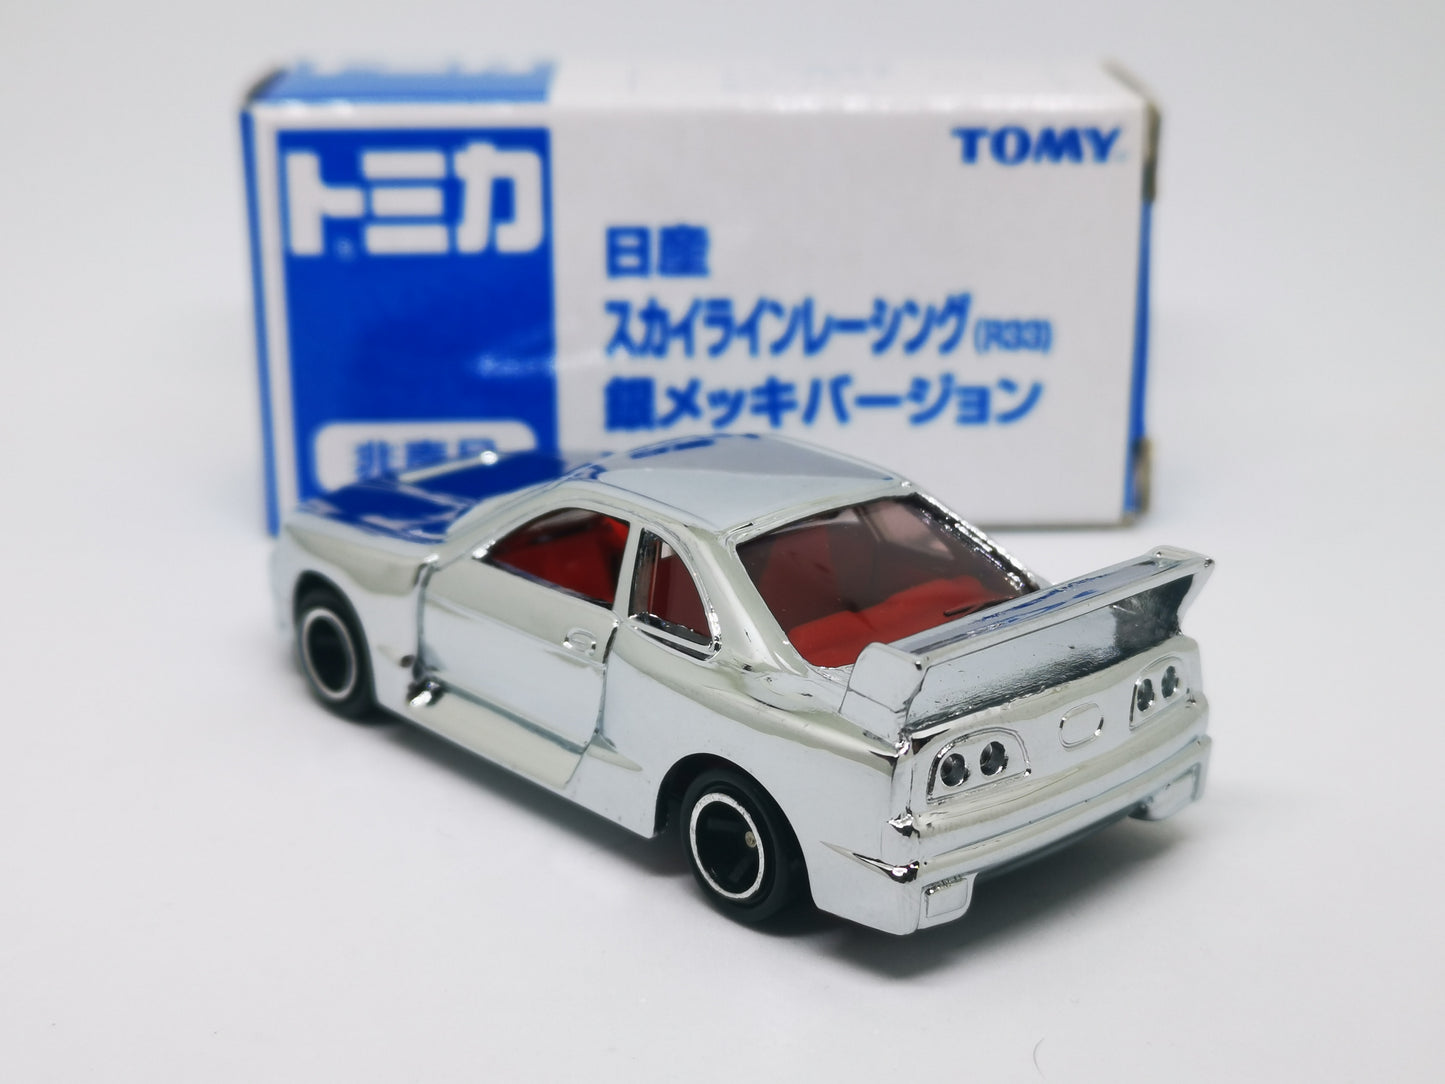 Tomica Expo Exclusive Nissan Skyline GT-R R33 Chrome